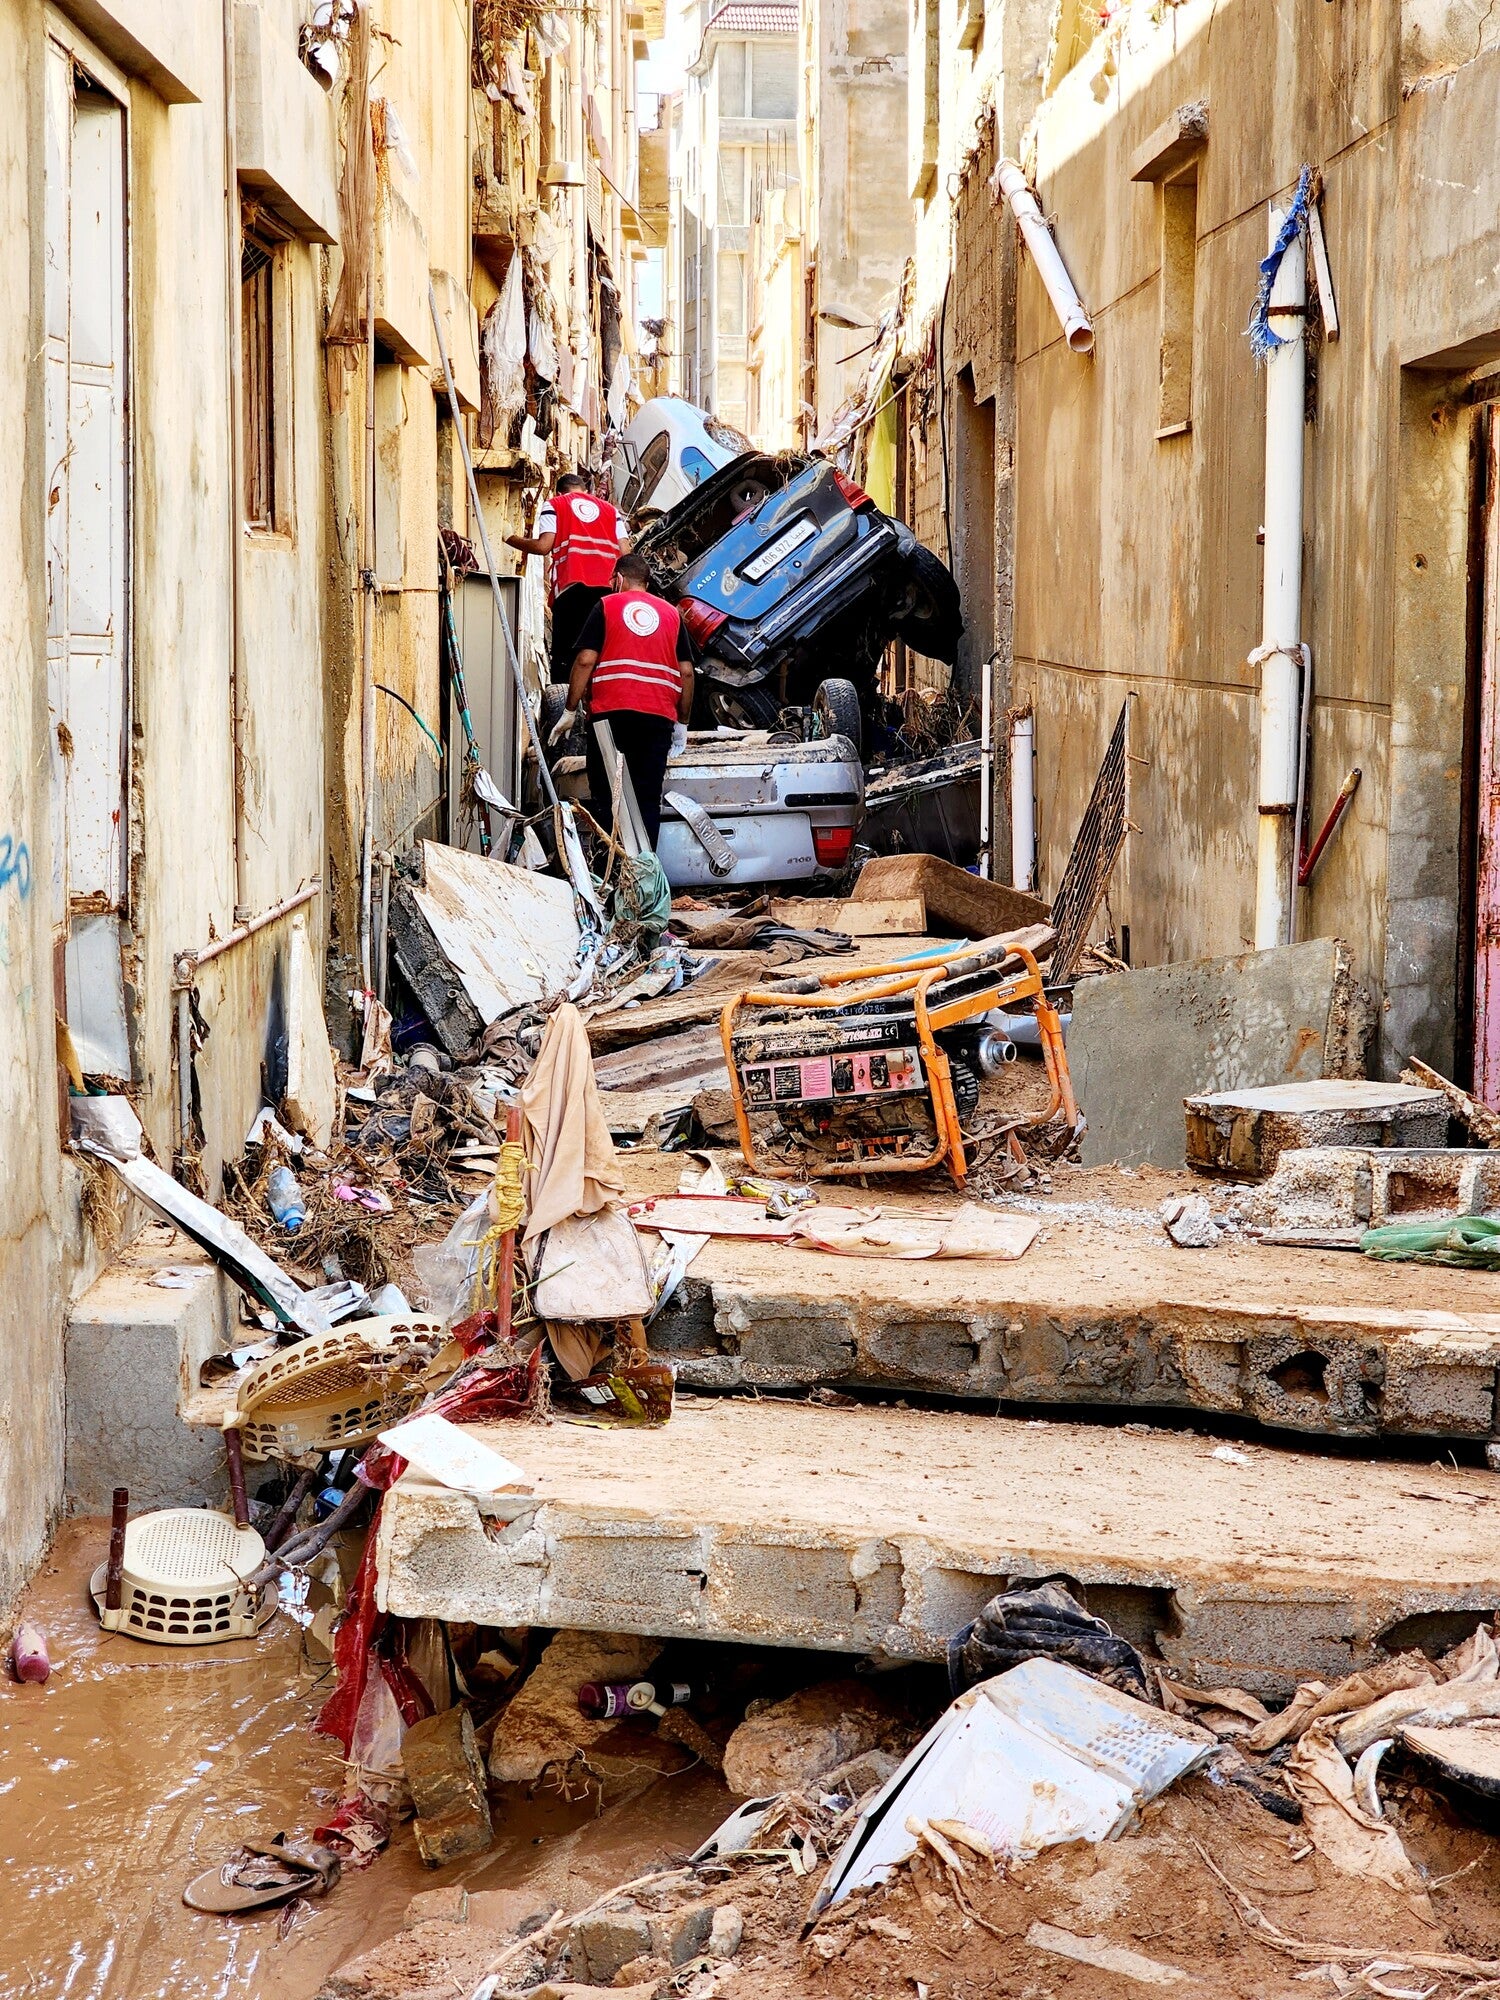 Narrow street between rows of buildings littered with debris, including two vehicles. Two men in red vests on the side with their backs to camera.